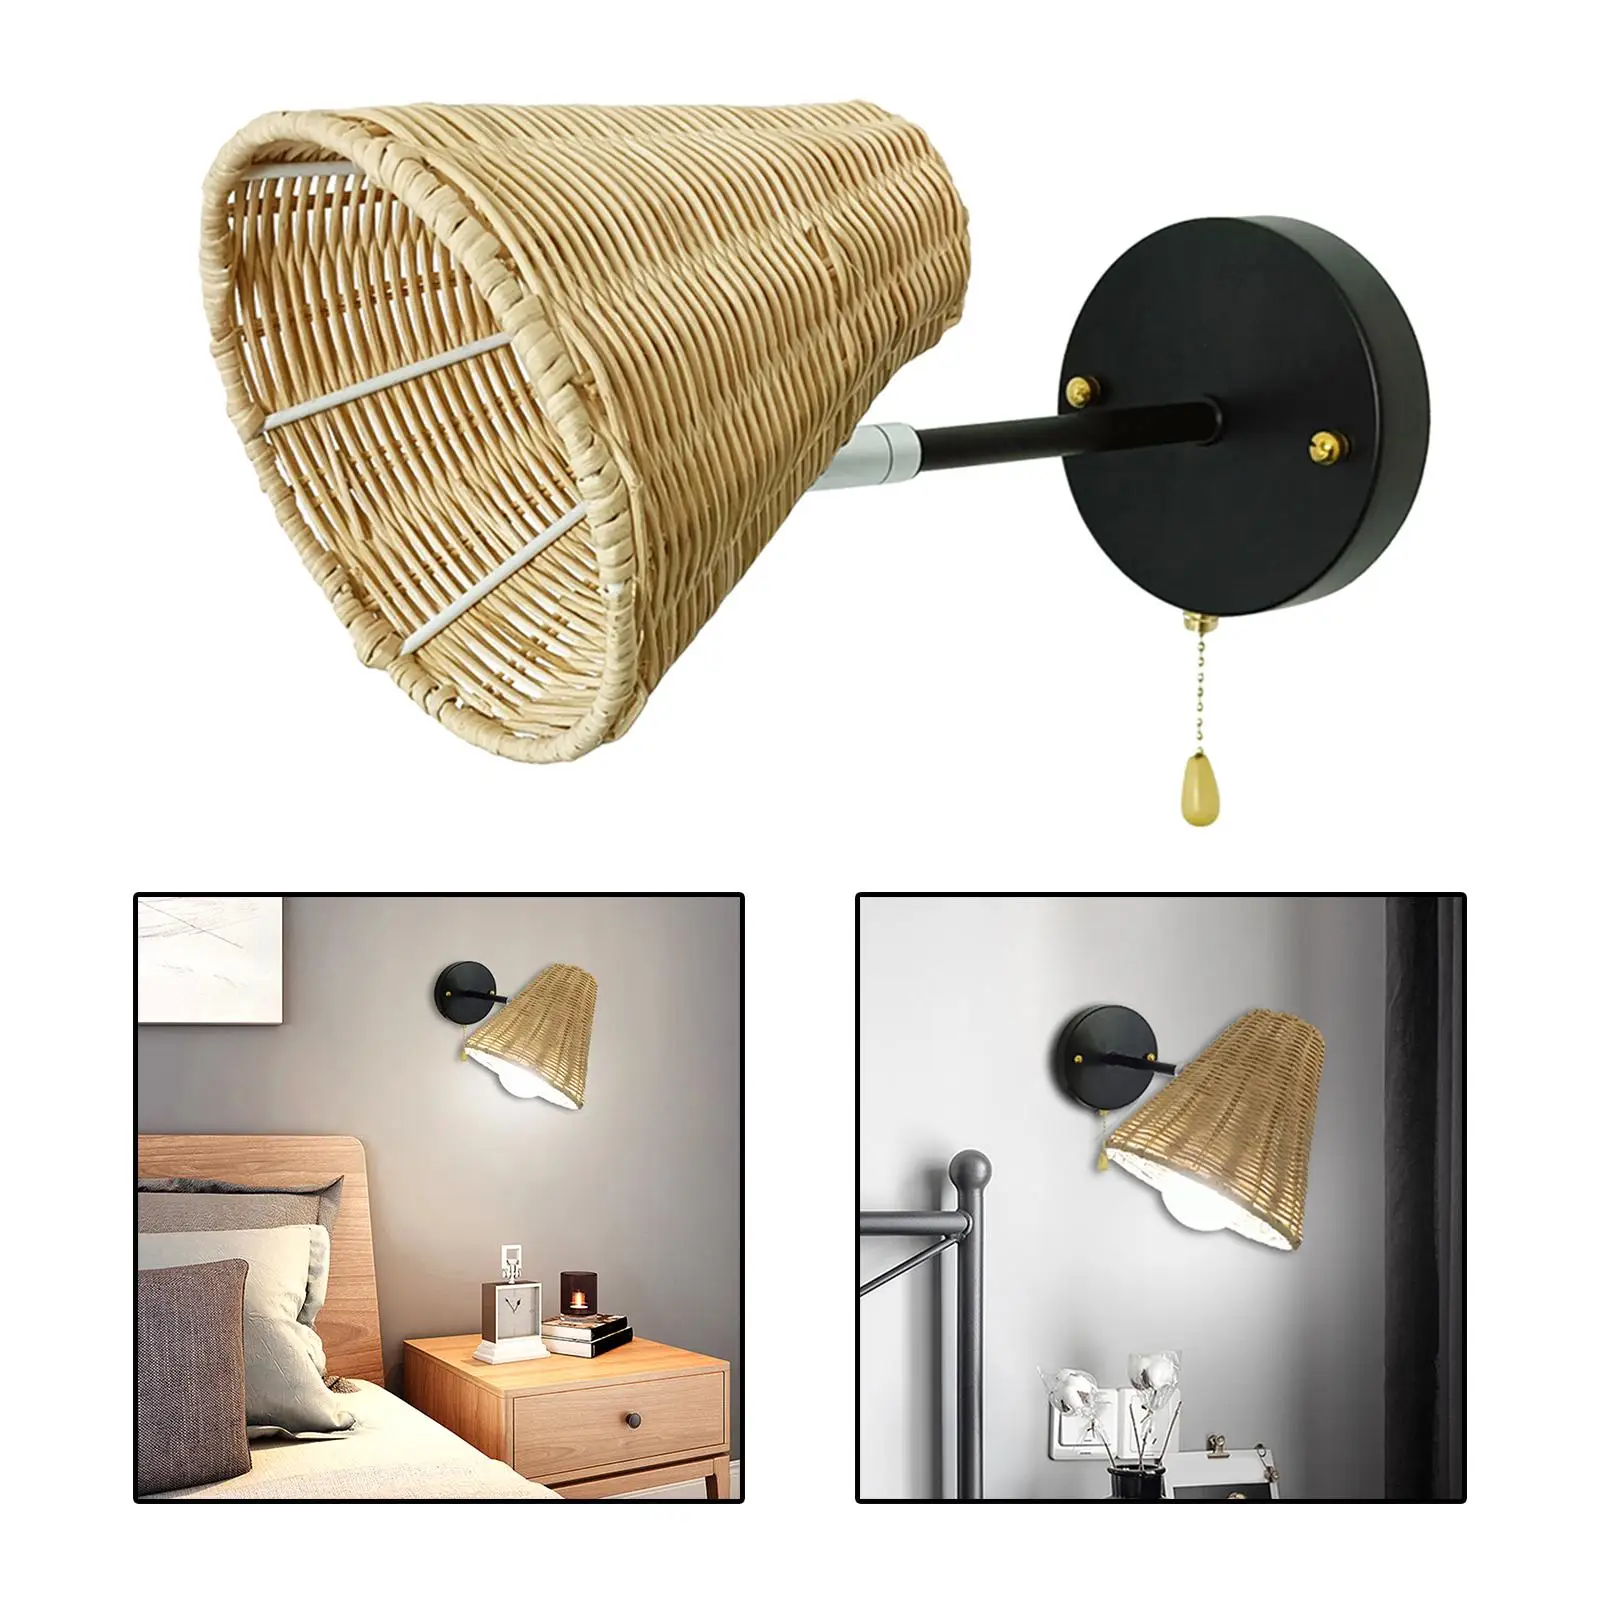 Rattan Wall Lamp Light Sconce E27 Rotatable with Pull Cord Switch for Hallway Living Room Bedside Home Decoration